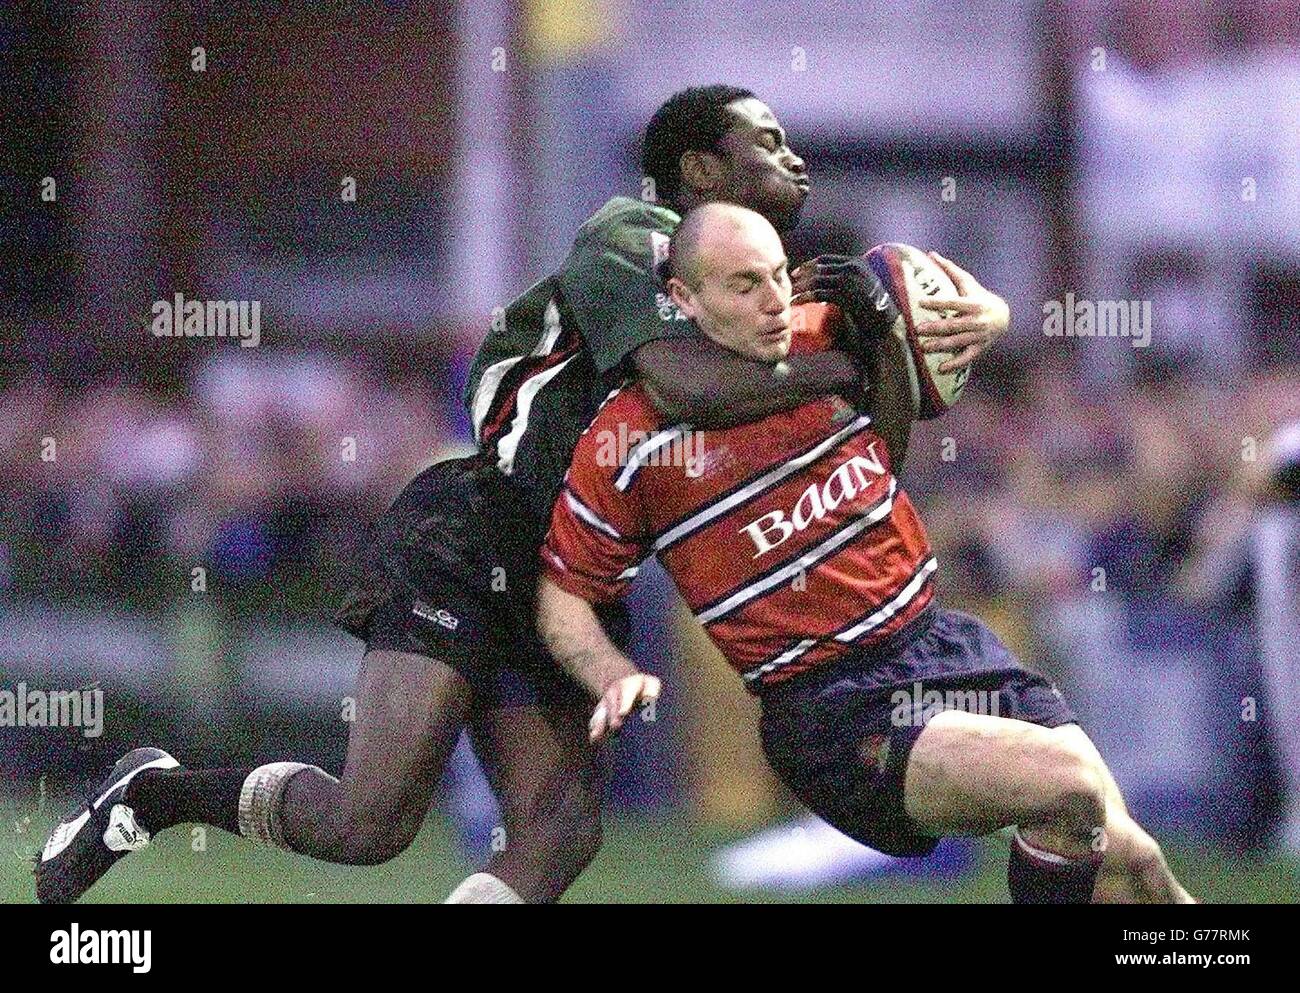 Gloucester's Ludovic Mercier (R) is tackled by Paul Sackey of London Irish during their Zurich Premiership match at Gloucester's Kingsholm stadium. Stock Photo